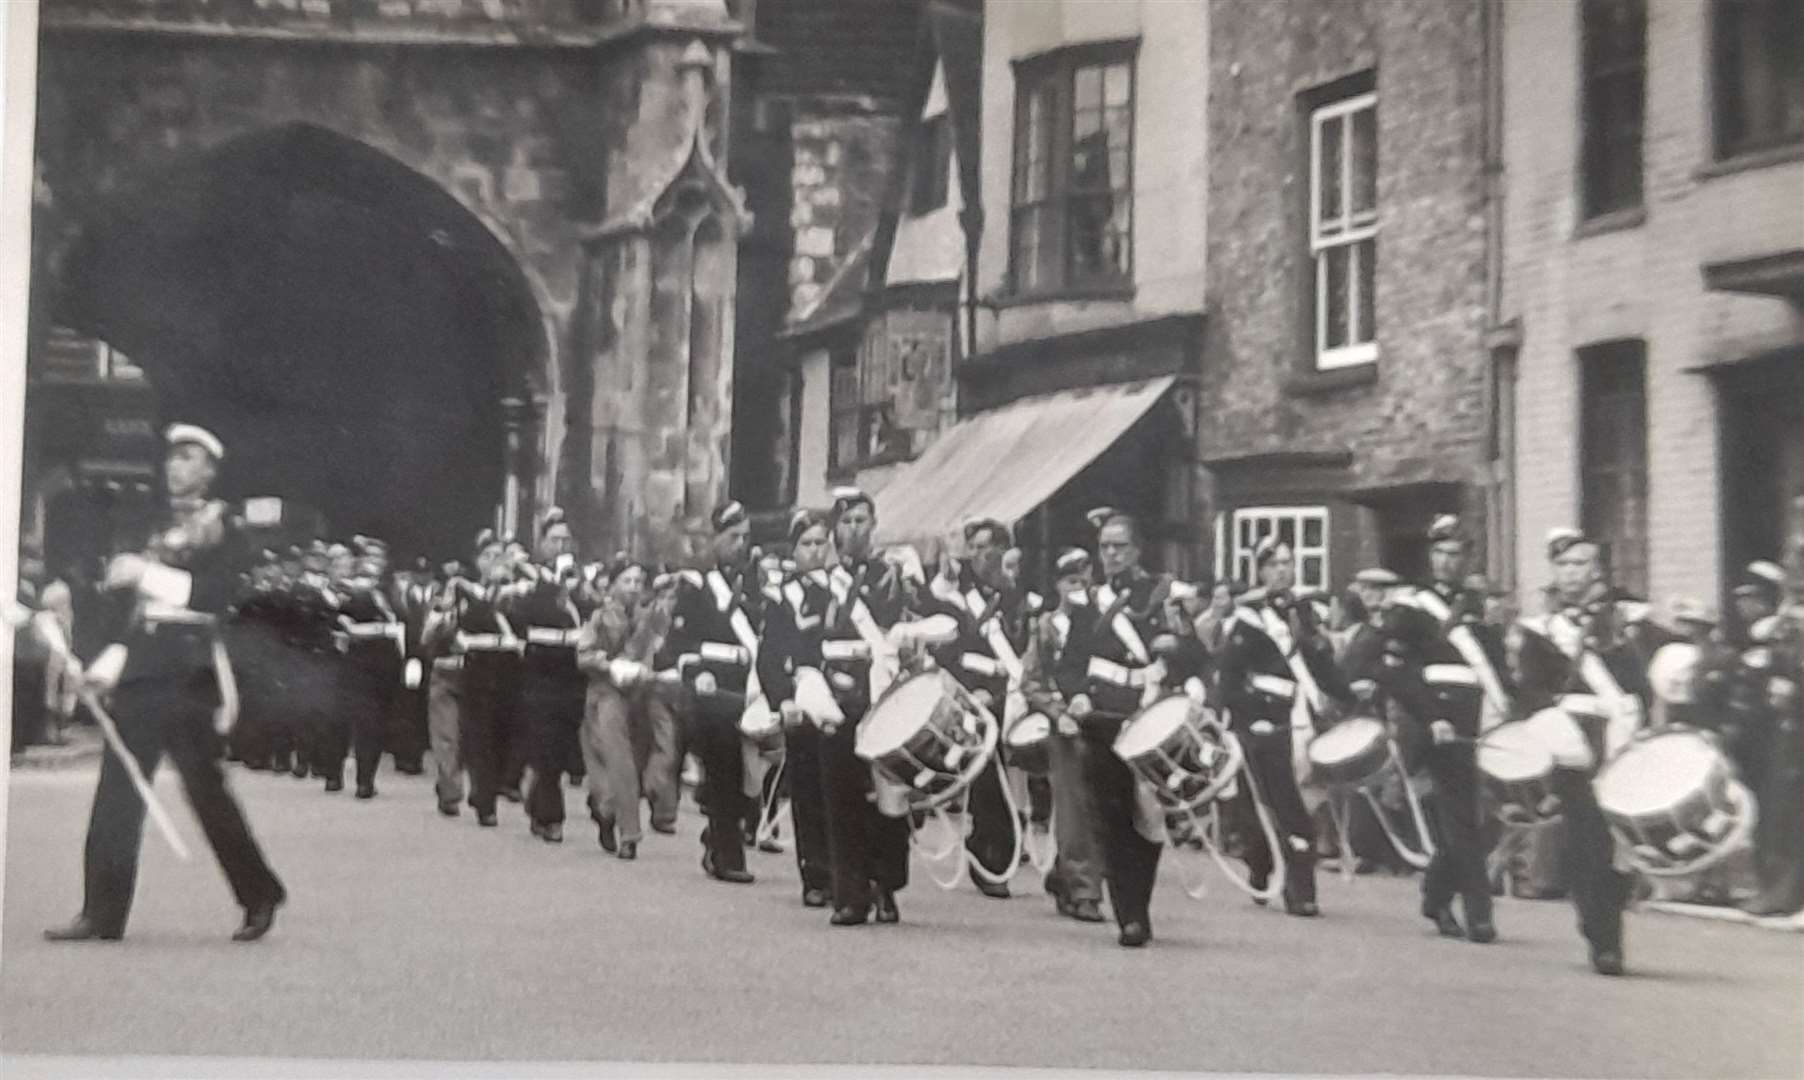 The band perform at a Canterbury church parade for the order of St John in 1952